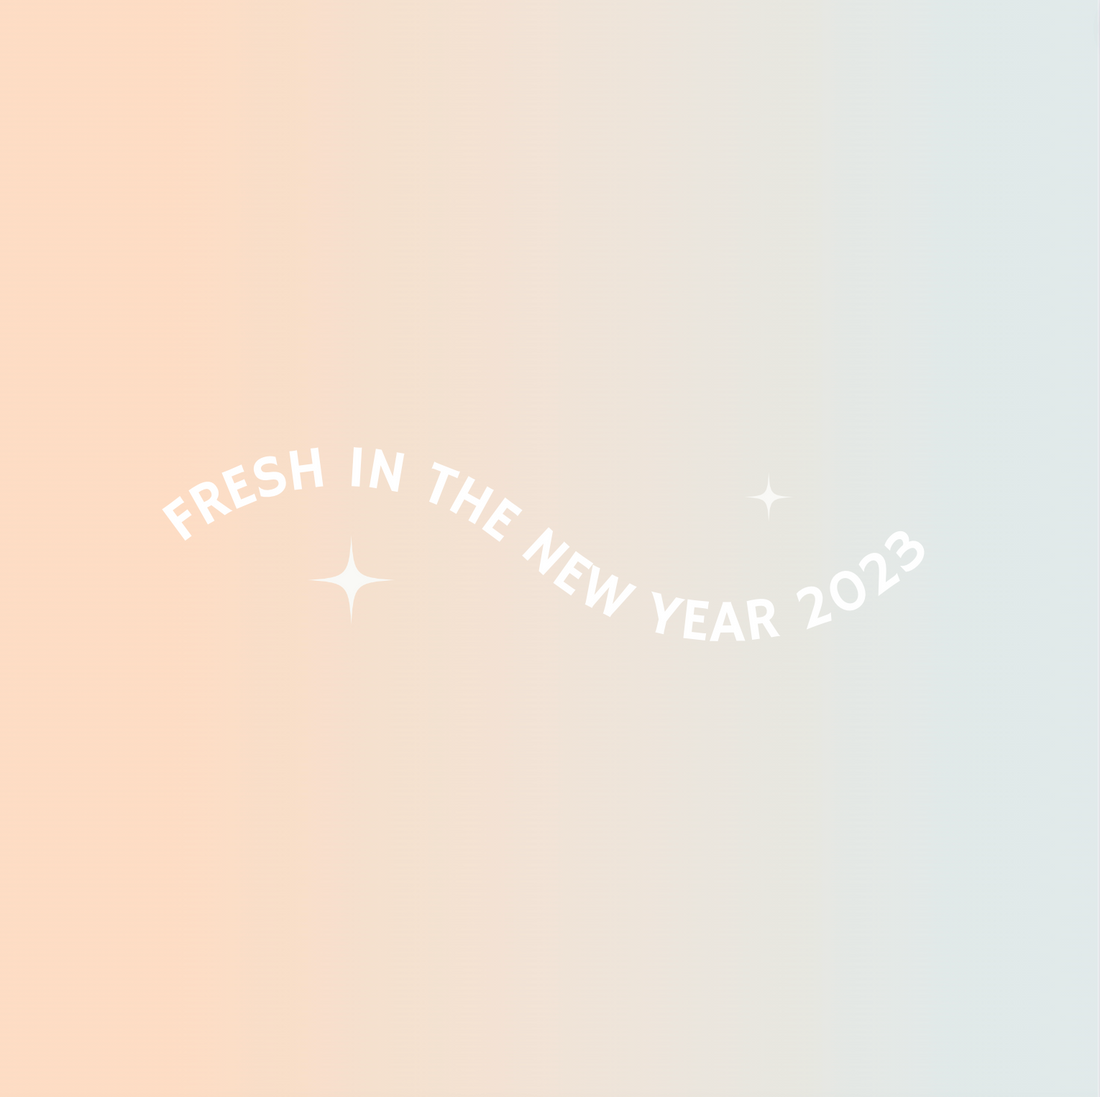 Fresh in the New Year 2023!